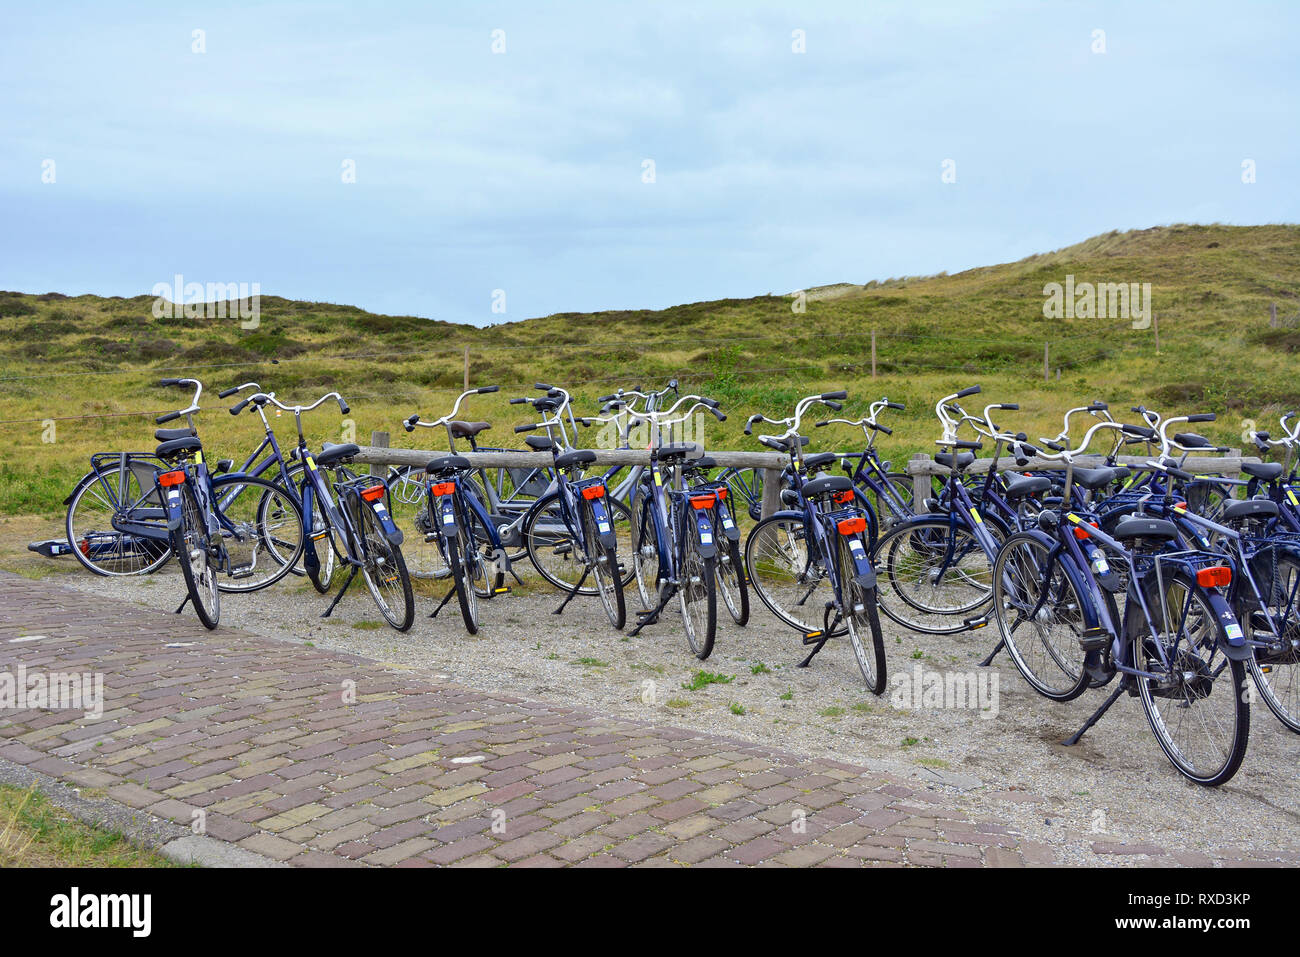 Many identical rental bicycles parking in front of integral nature reserve in Texel Netherlands Stock Photo